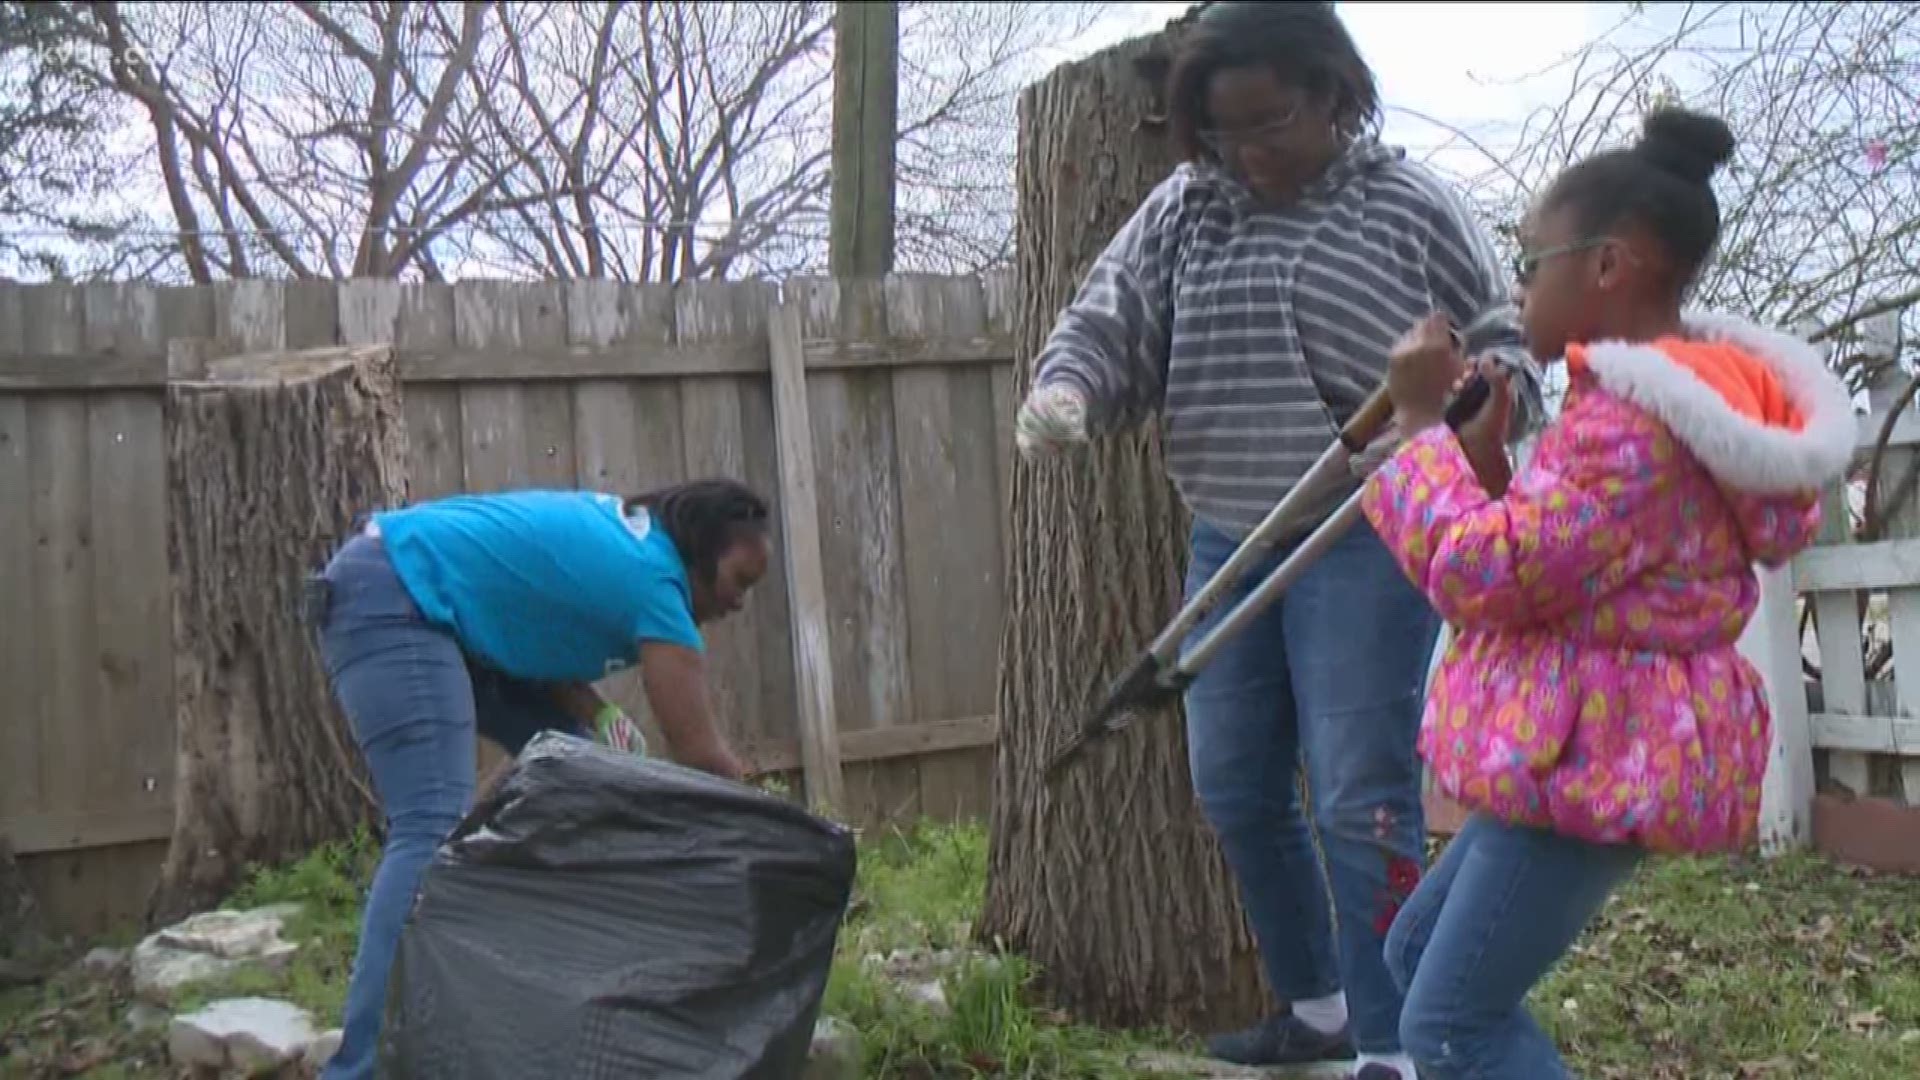 Some in the Austin area chose to live out Dr. Martin Luther King Jr.'s teachings by volunteering in their community.